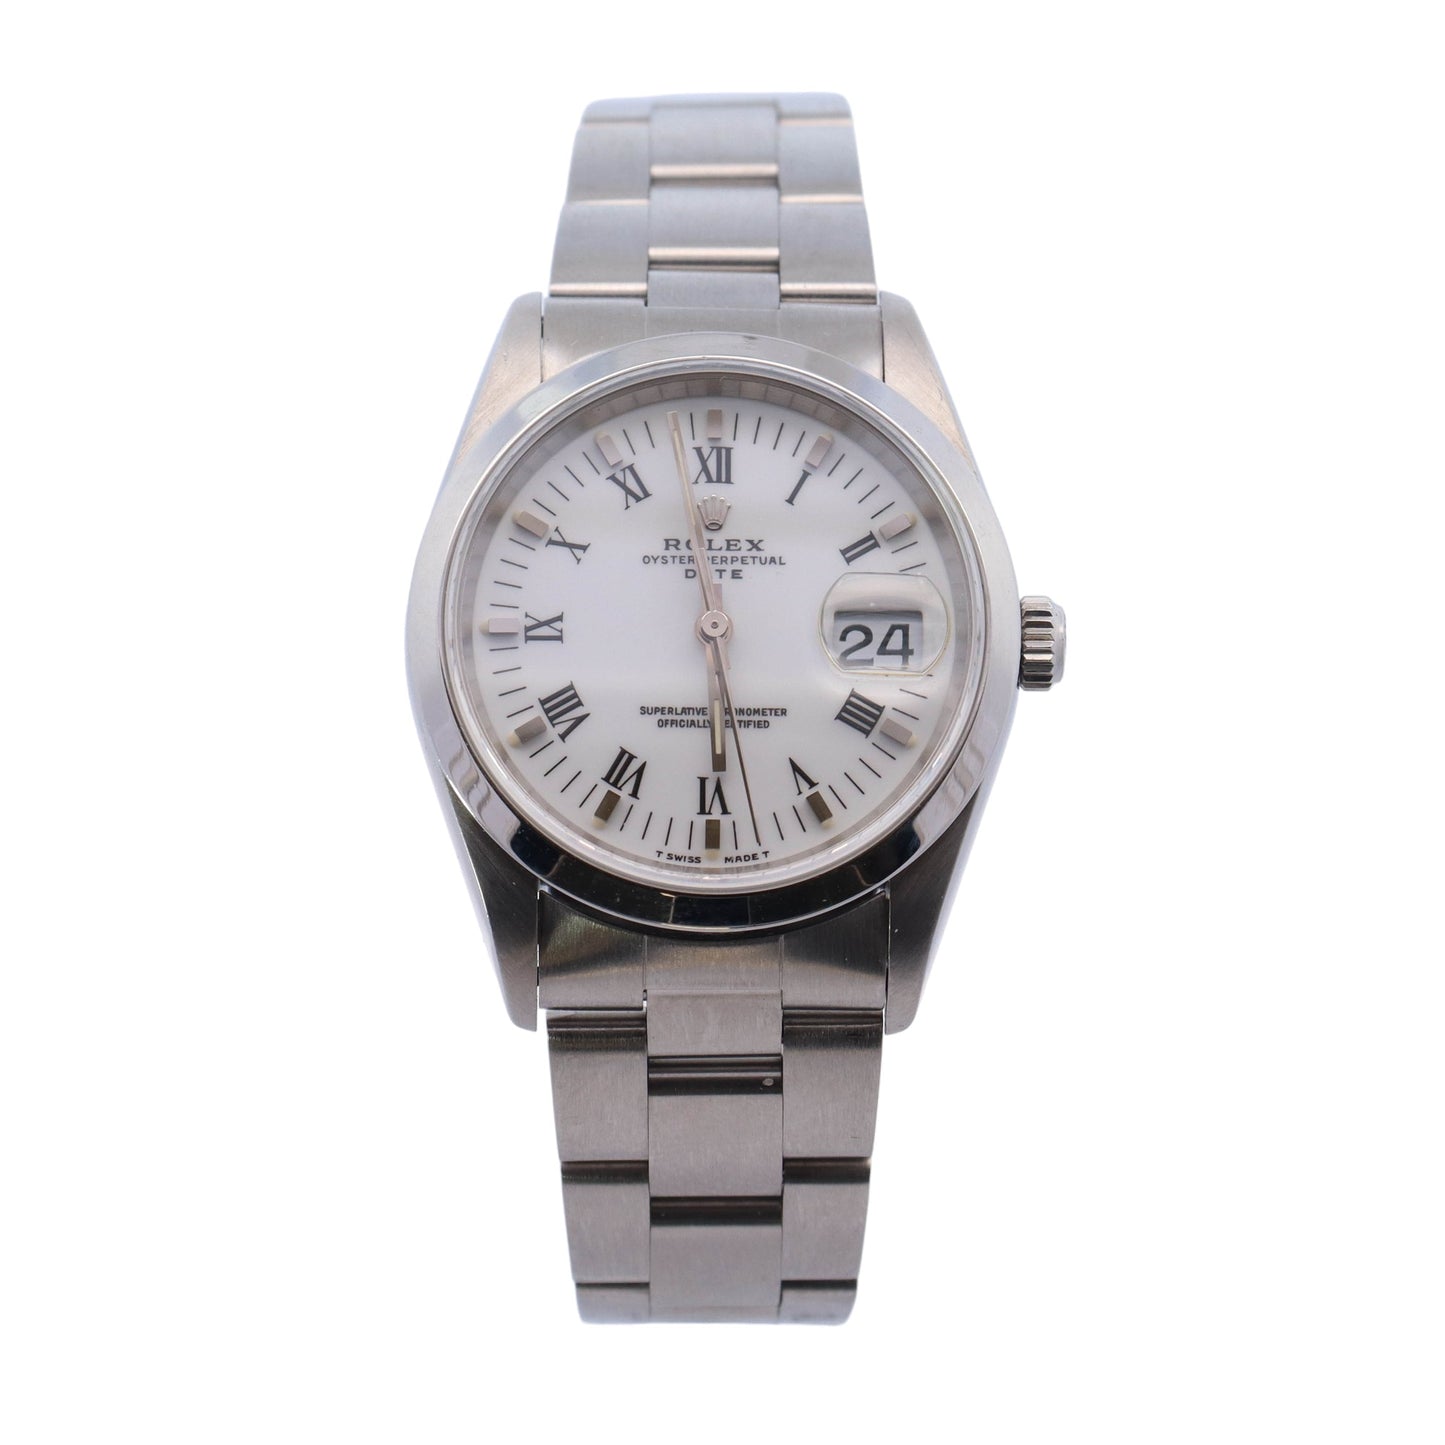 Rolex Oyster Perpetual Date Stainless Steel 34mm White Roman Dial Watch Reference #: 15200 - Happy Jewelers Fine Jewelry Lifetime Warranty